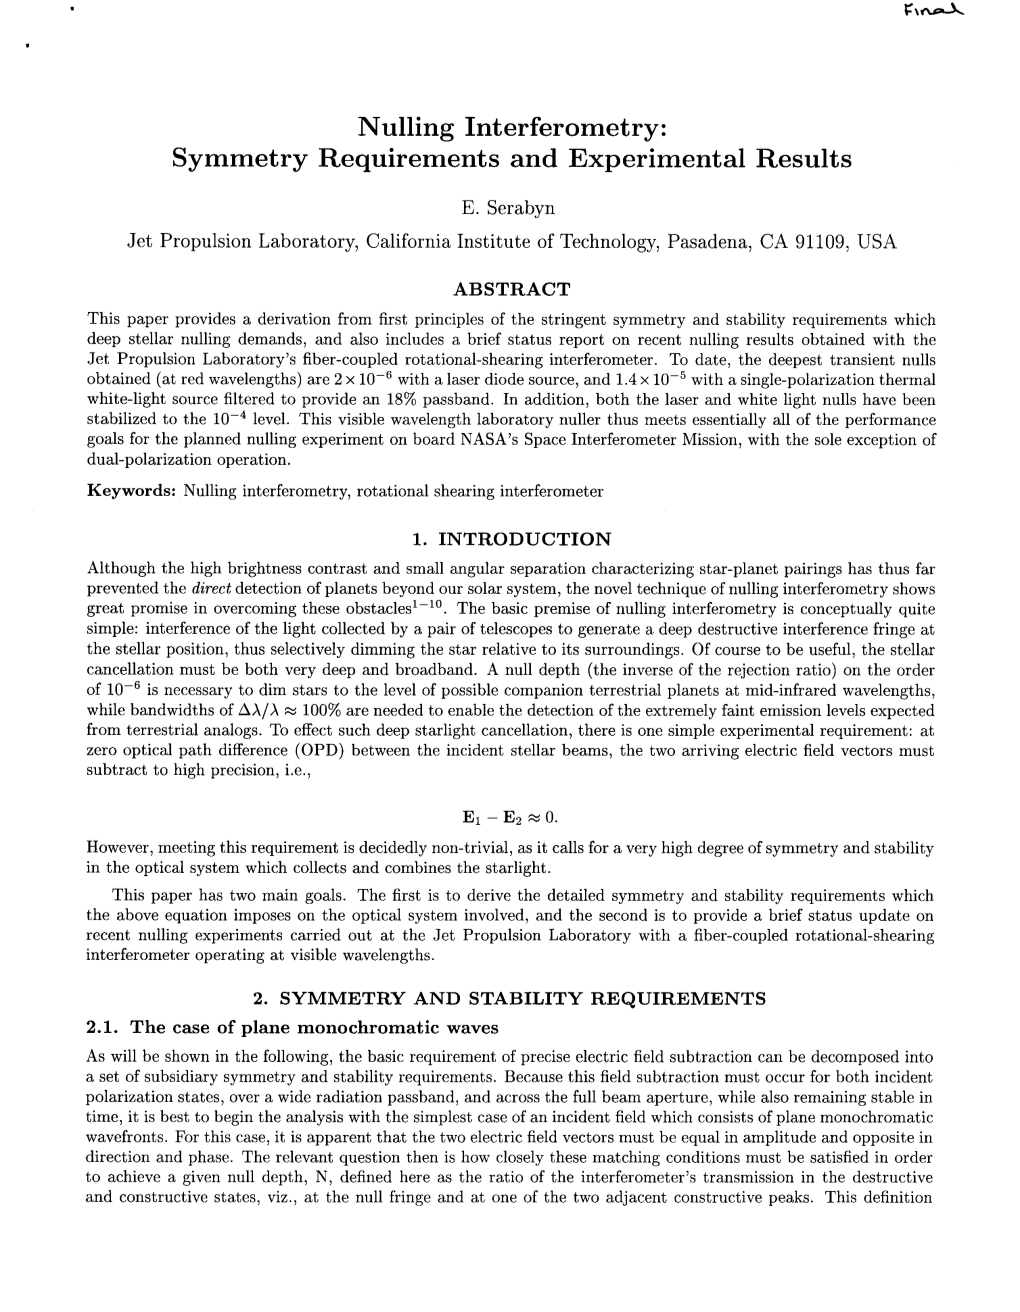 Nulling Interferometry: Symmetry Requirements and Experimental Results